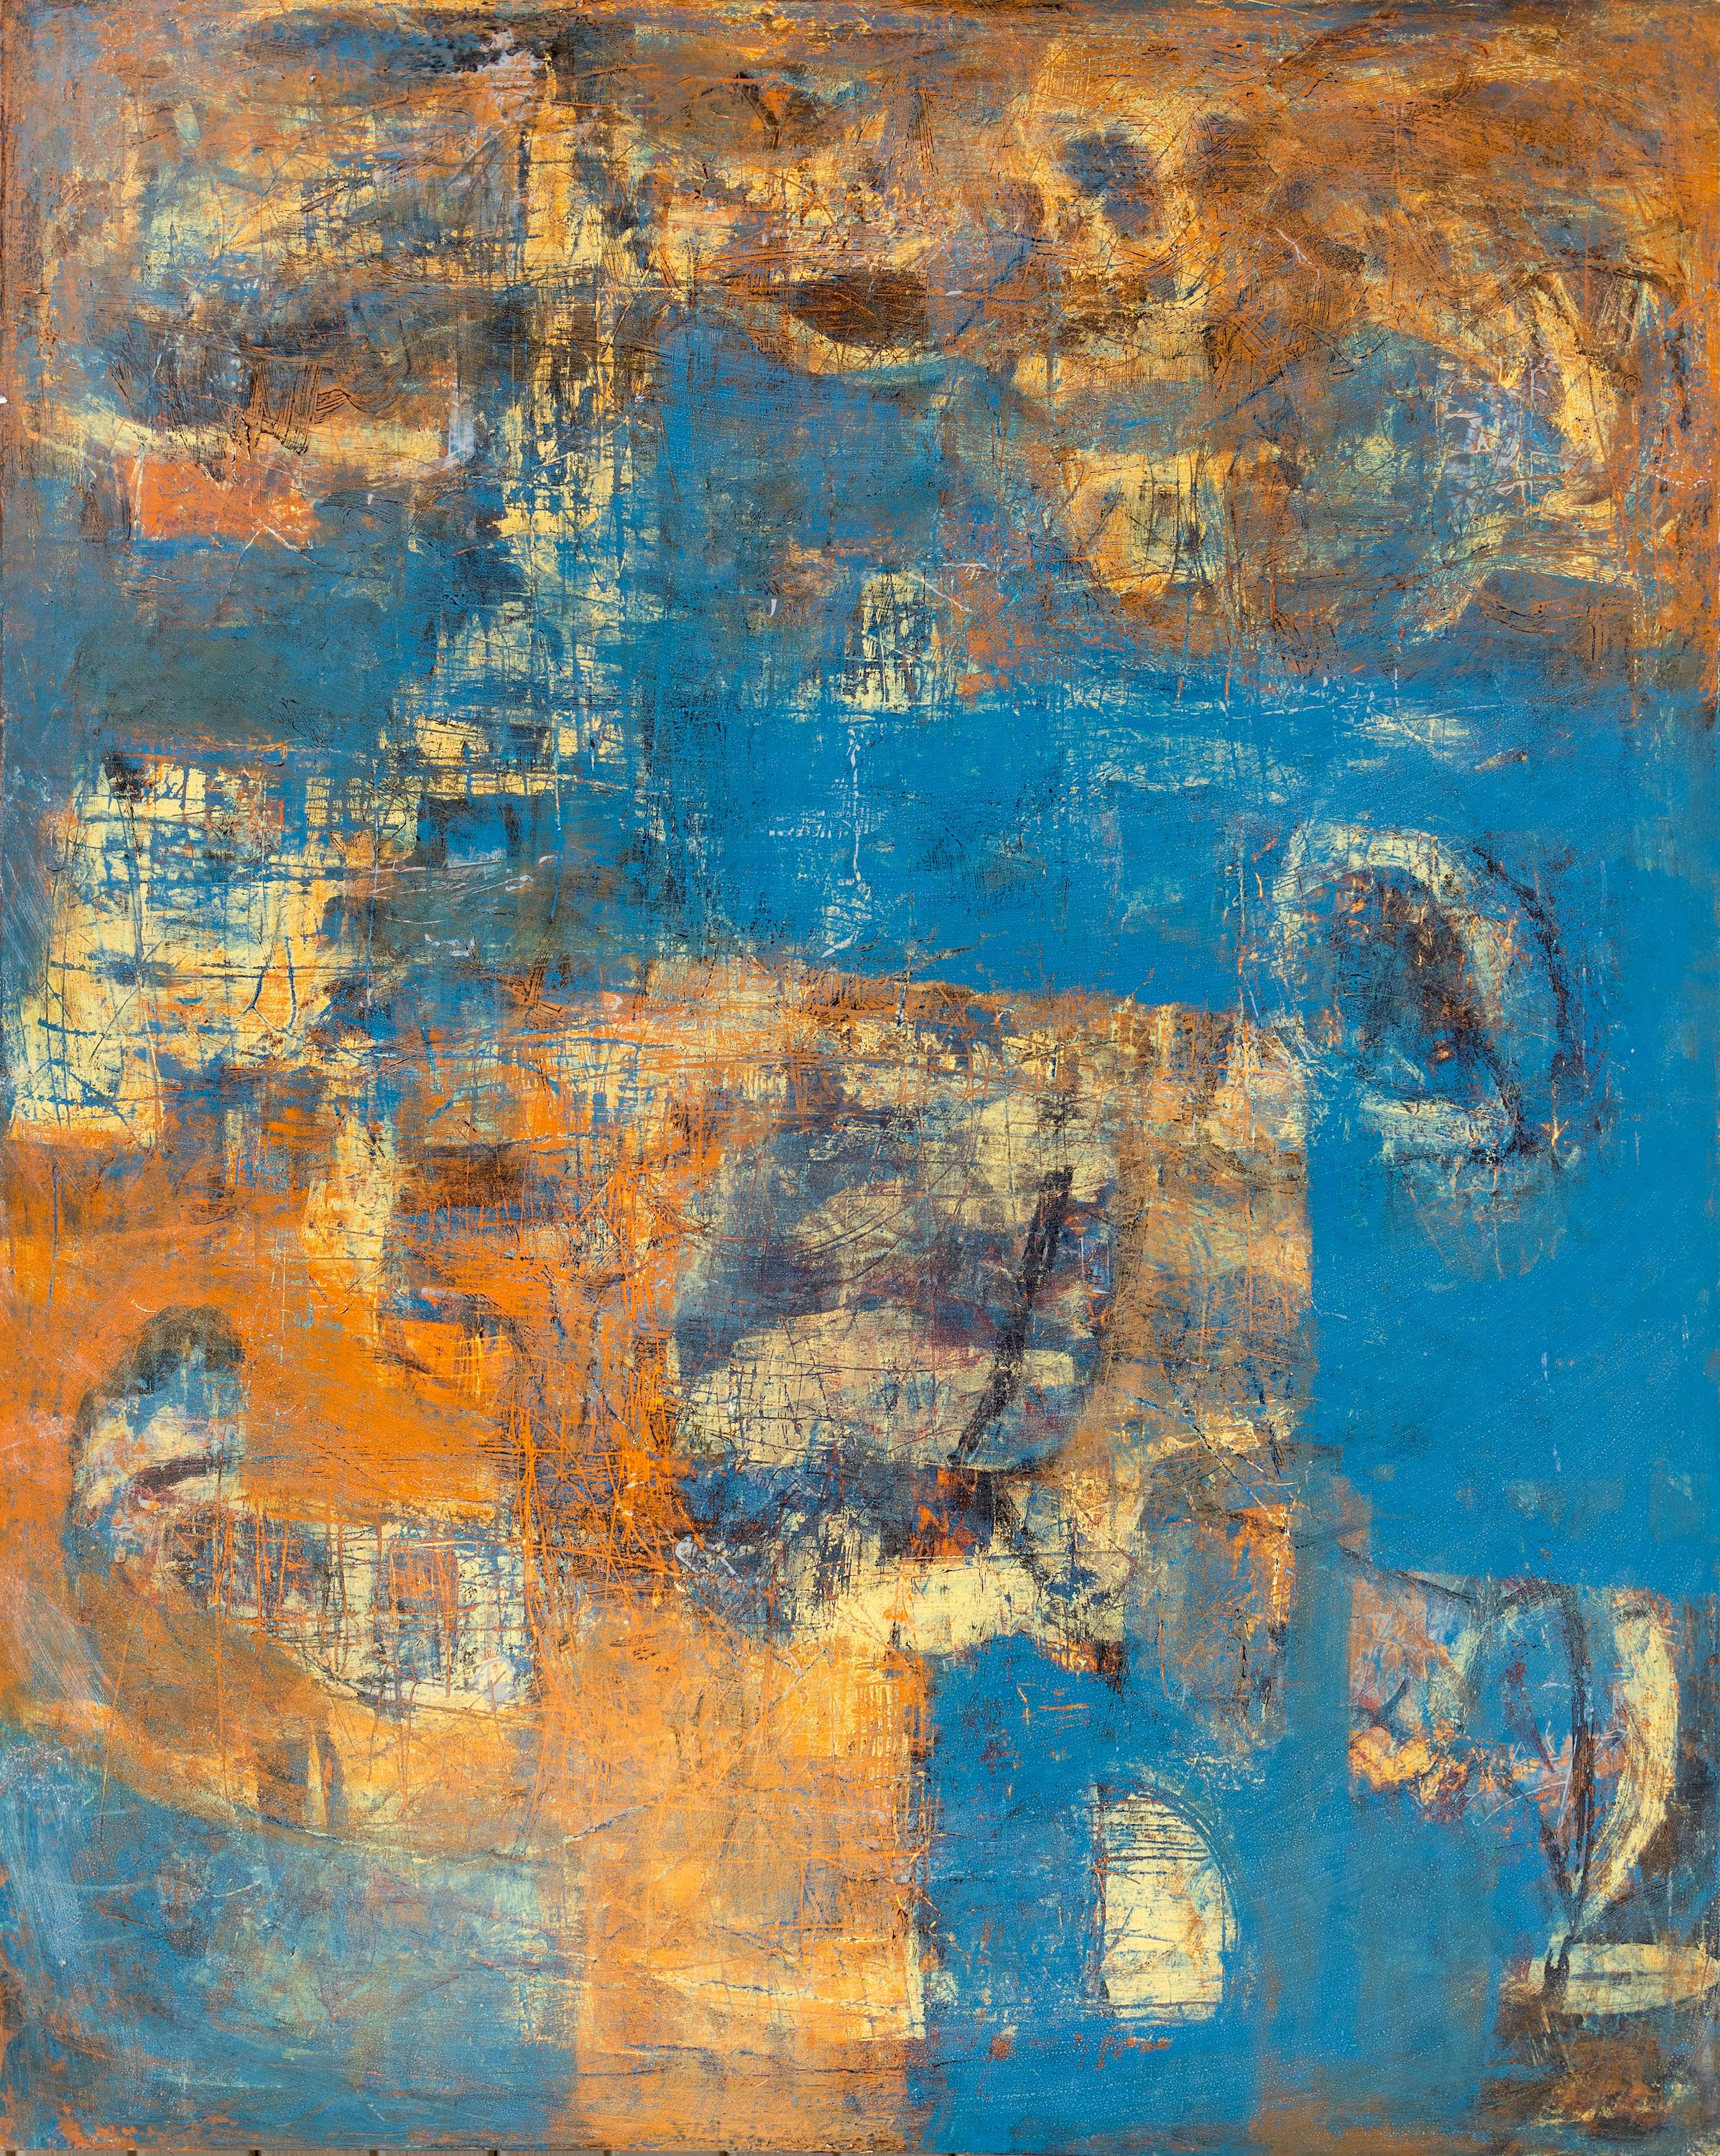 Blue, Orange, and Yellow Abstract - Abstract Expressionist Painting by Tom Reno